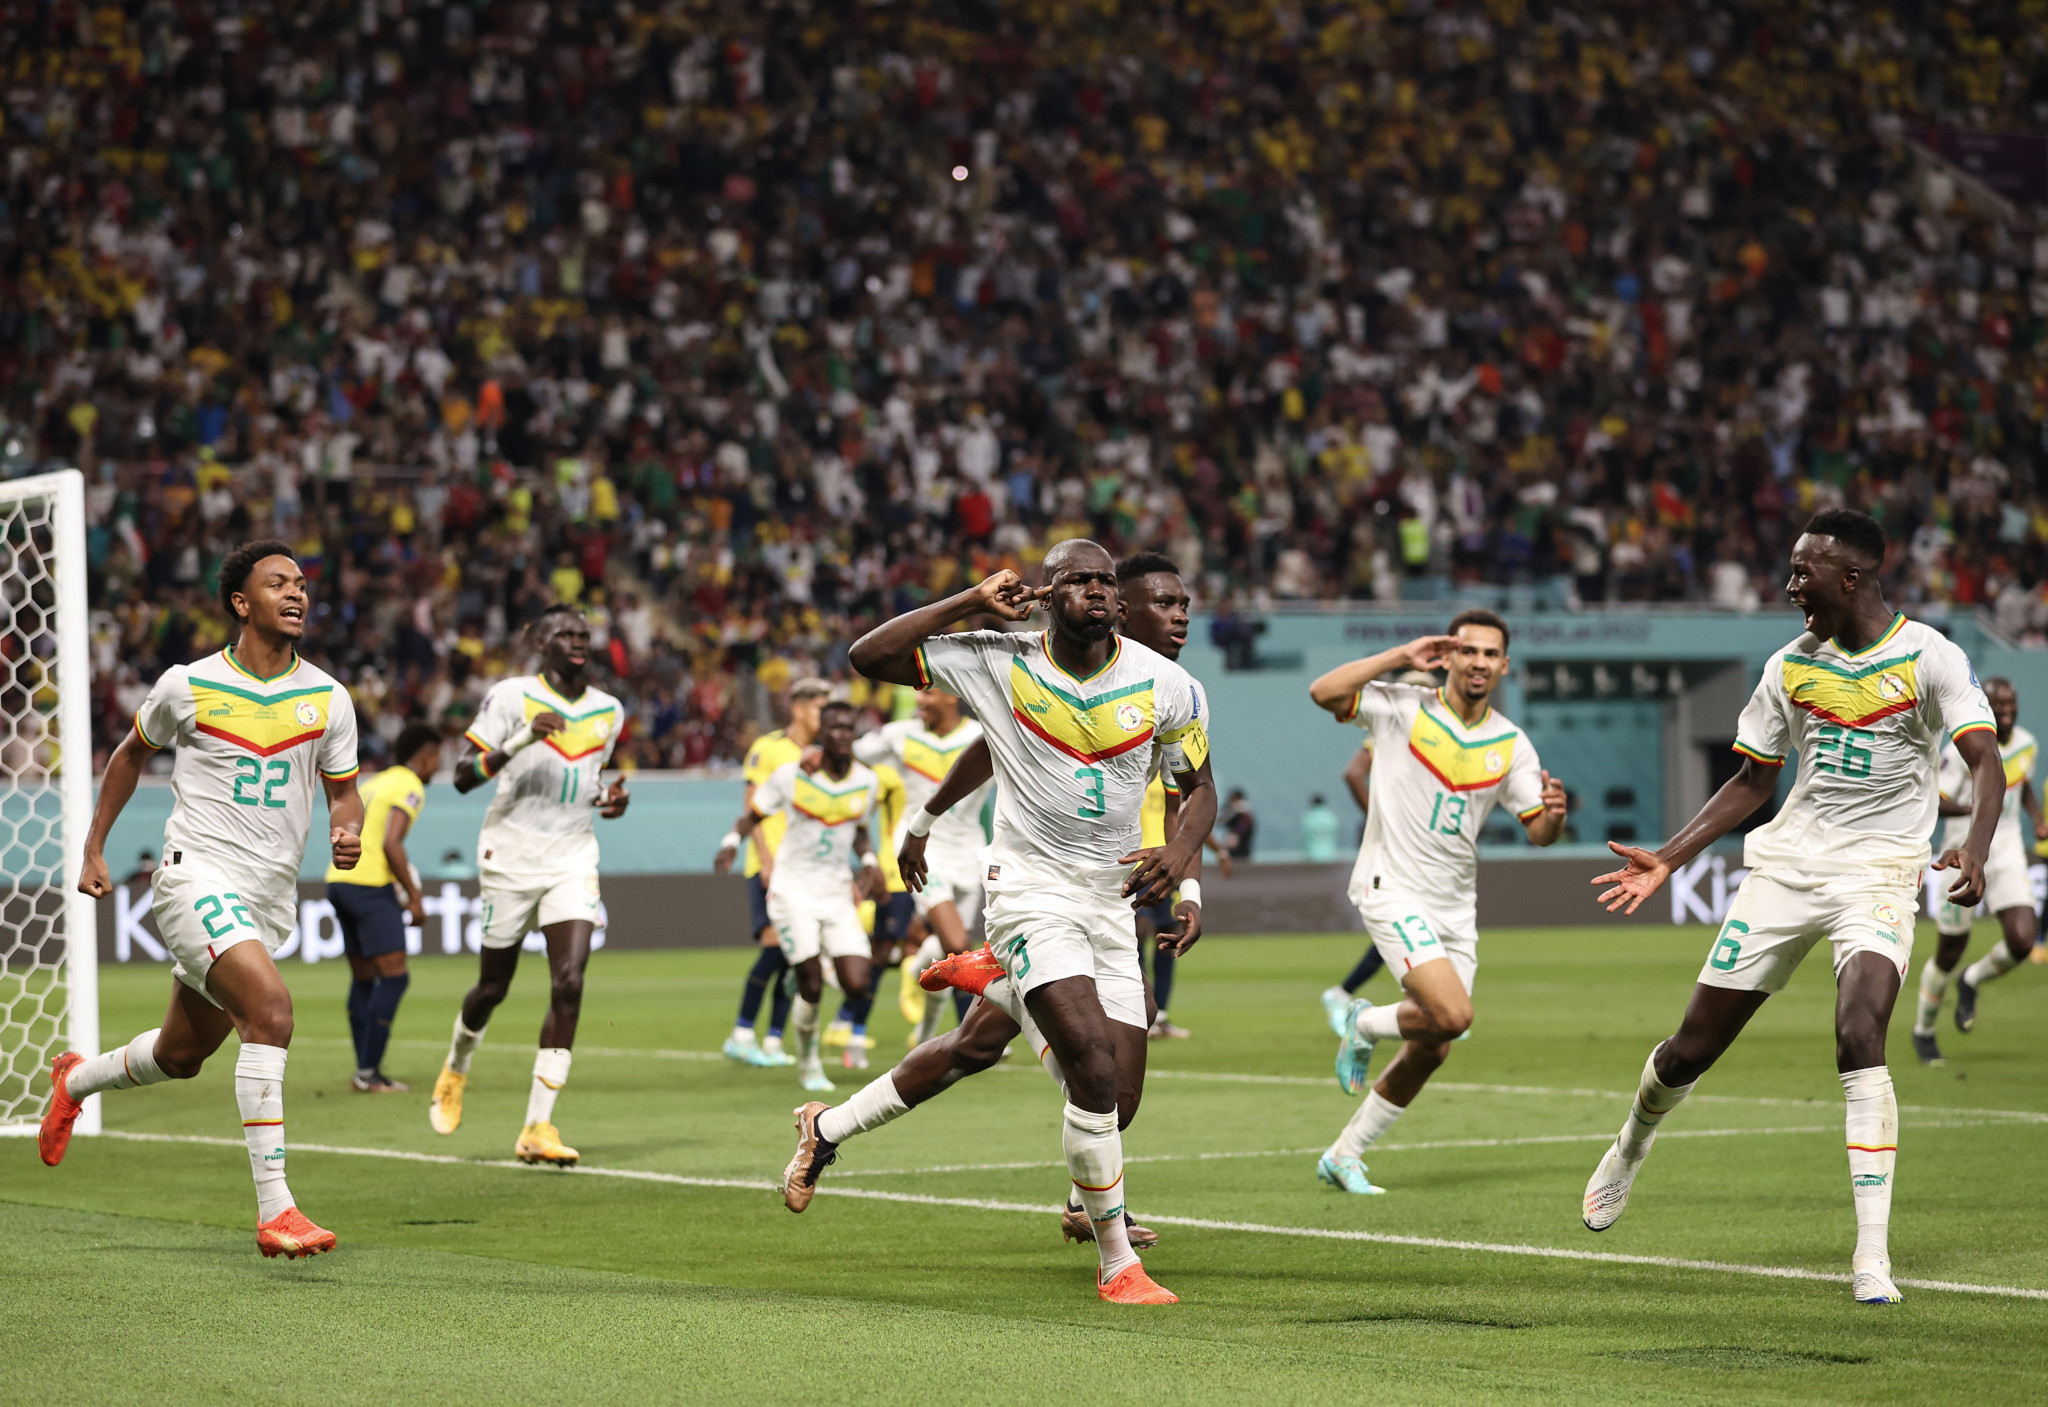 Senegal's players celebrate after scoring the crucial goal to beat Ecuador and reach the last 16 ©Getty Images